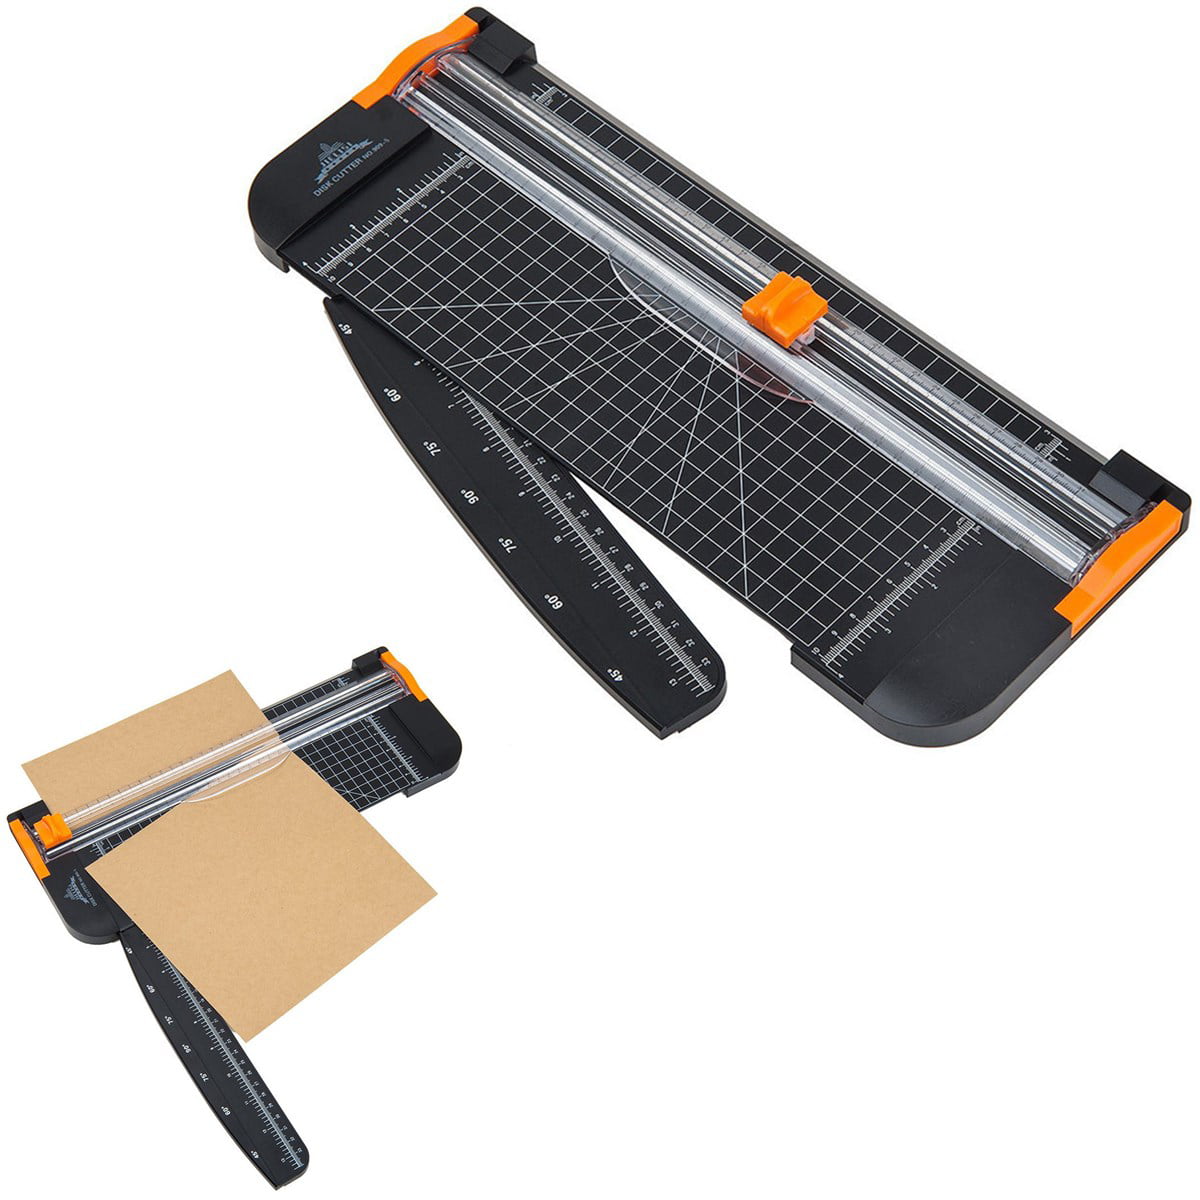 A4 A5 Precision Rotary Guillotine Paper Photo Trimmer Cutter Ruler Portable New 